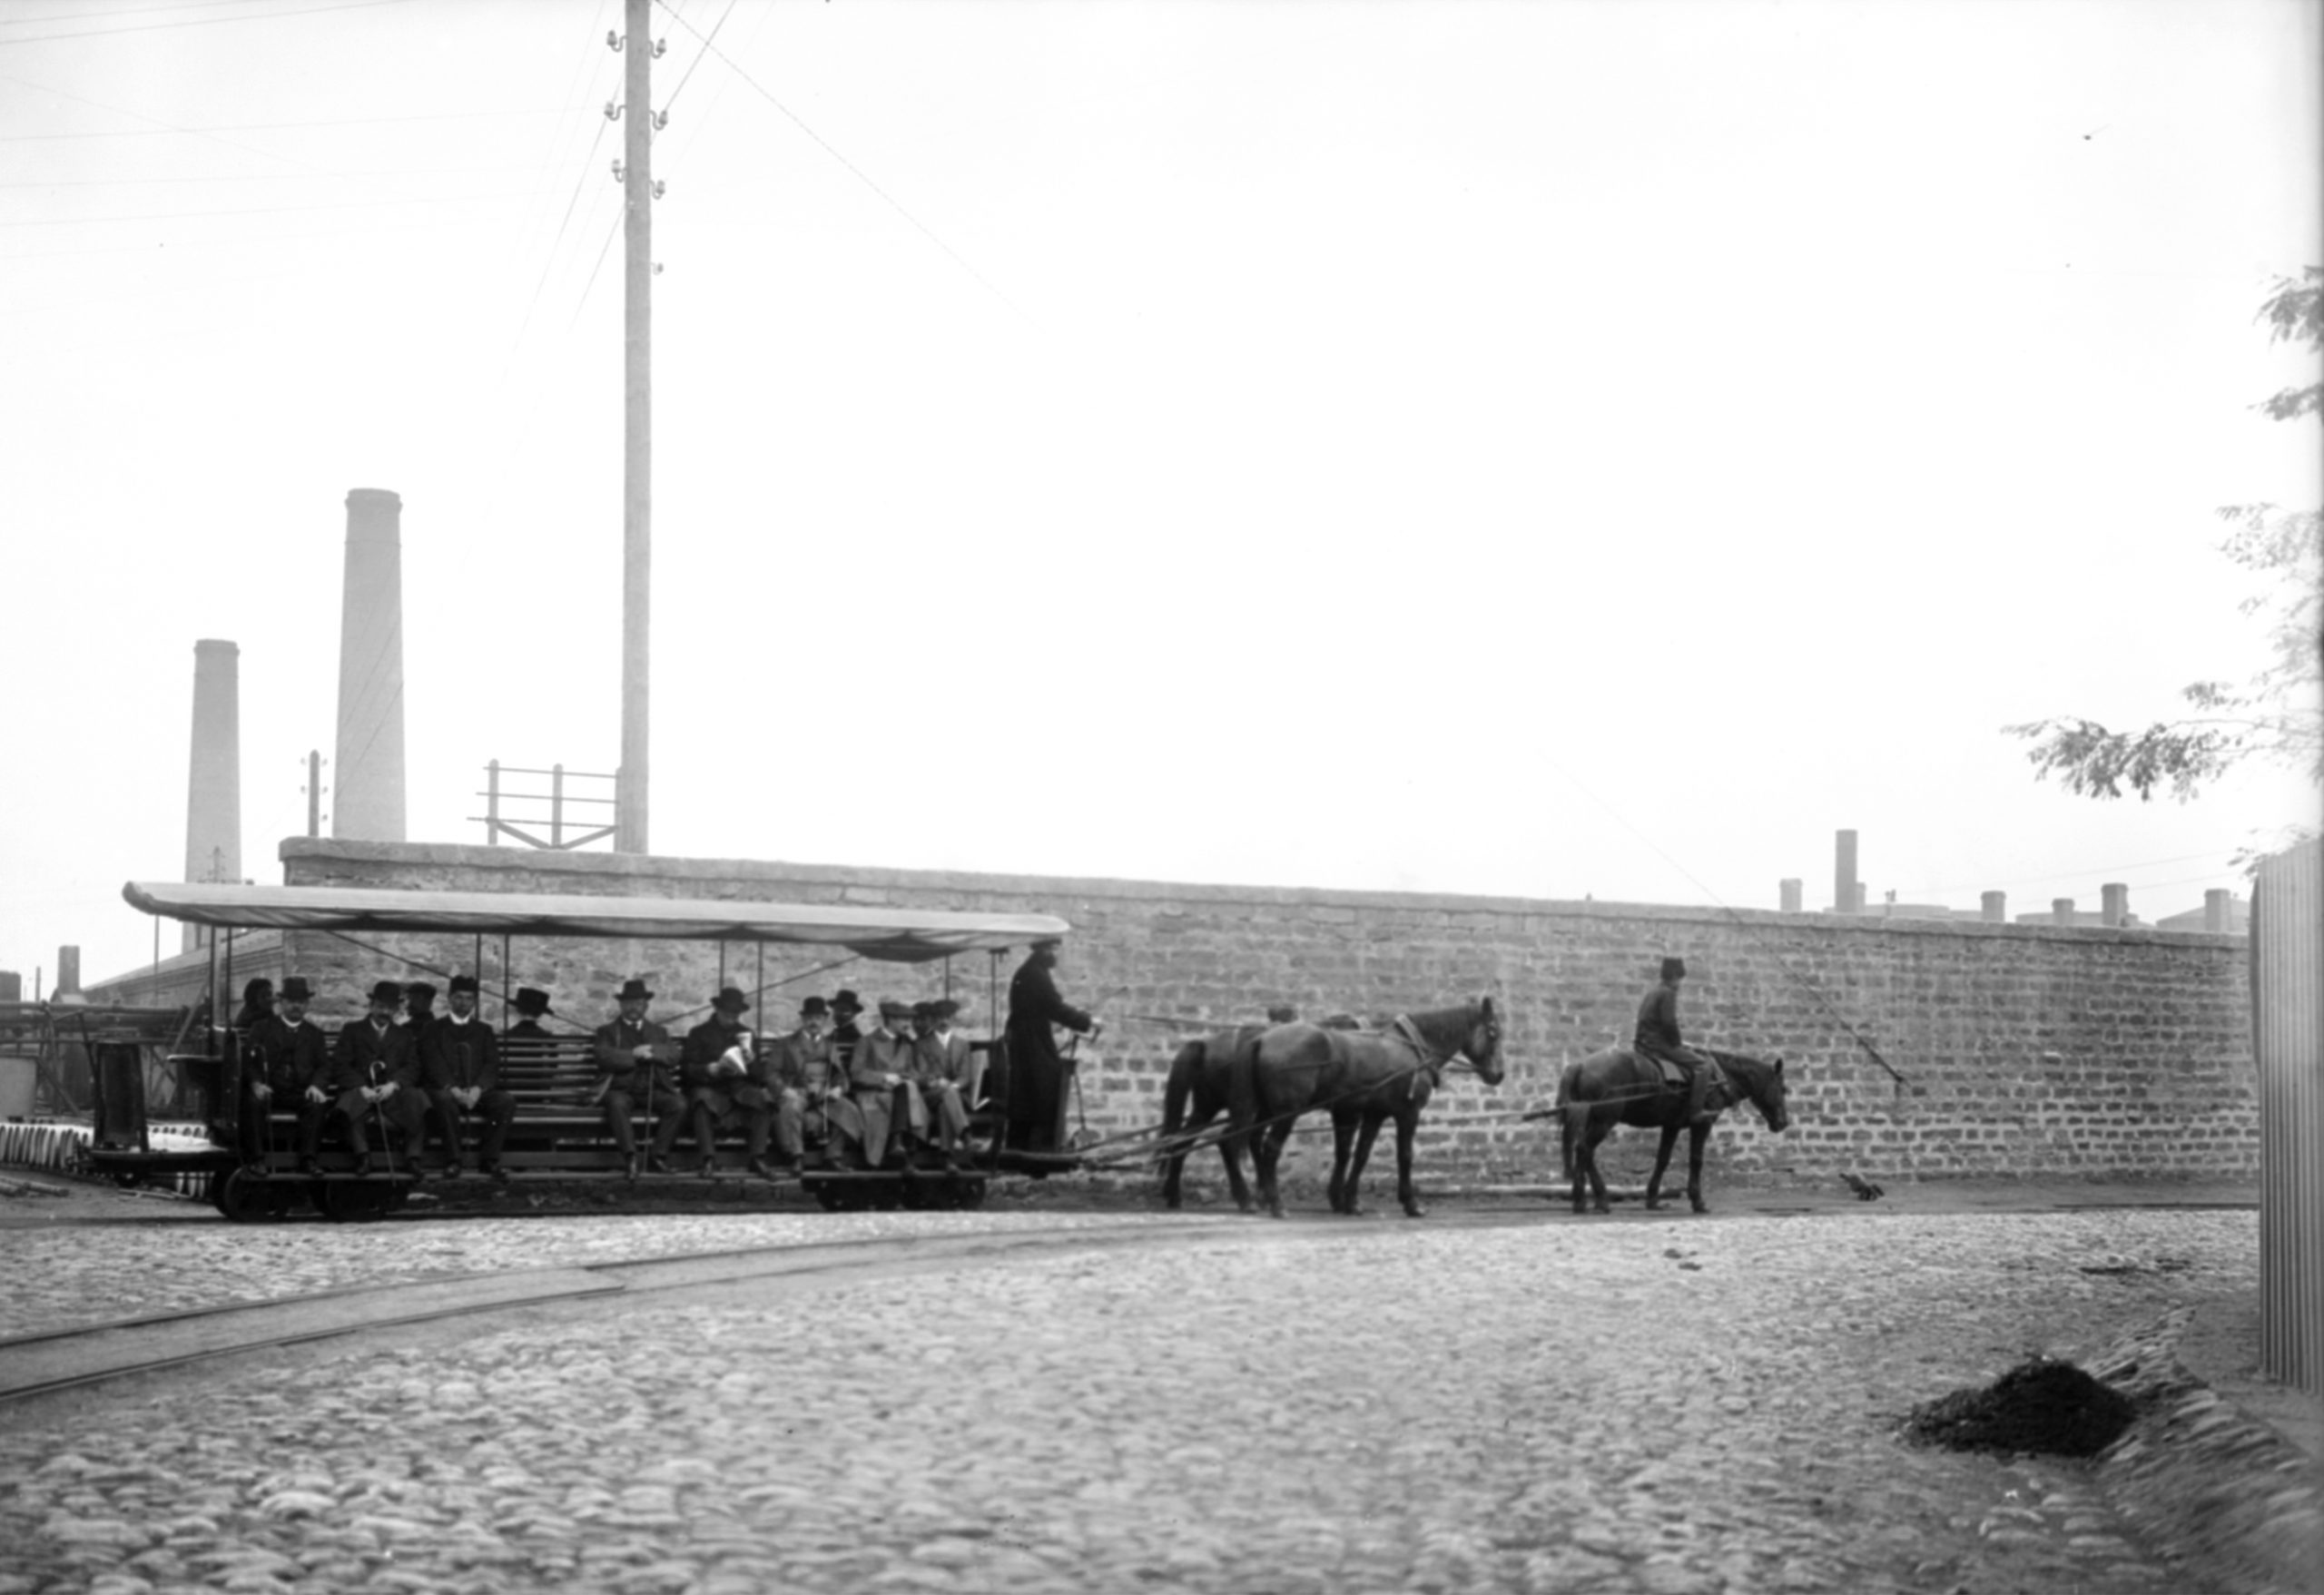 Such horse-drawn carriages called “konka” helped with free of charge transport of workers to their working places on the other side of the town.